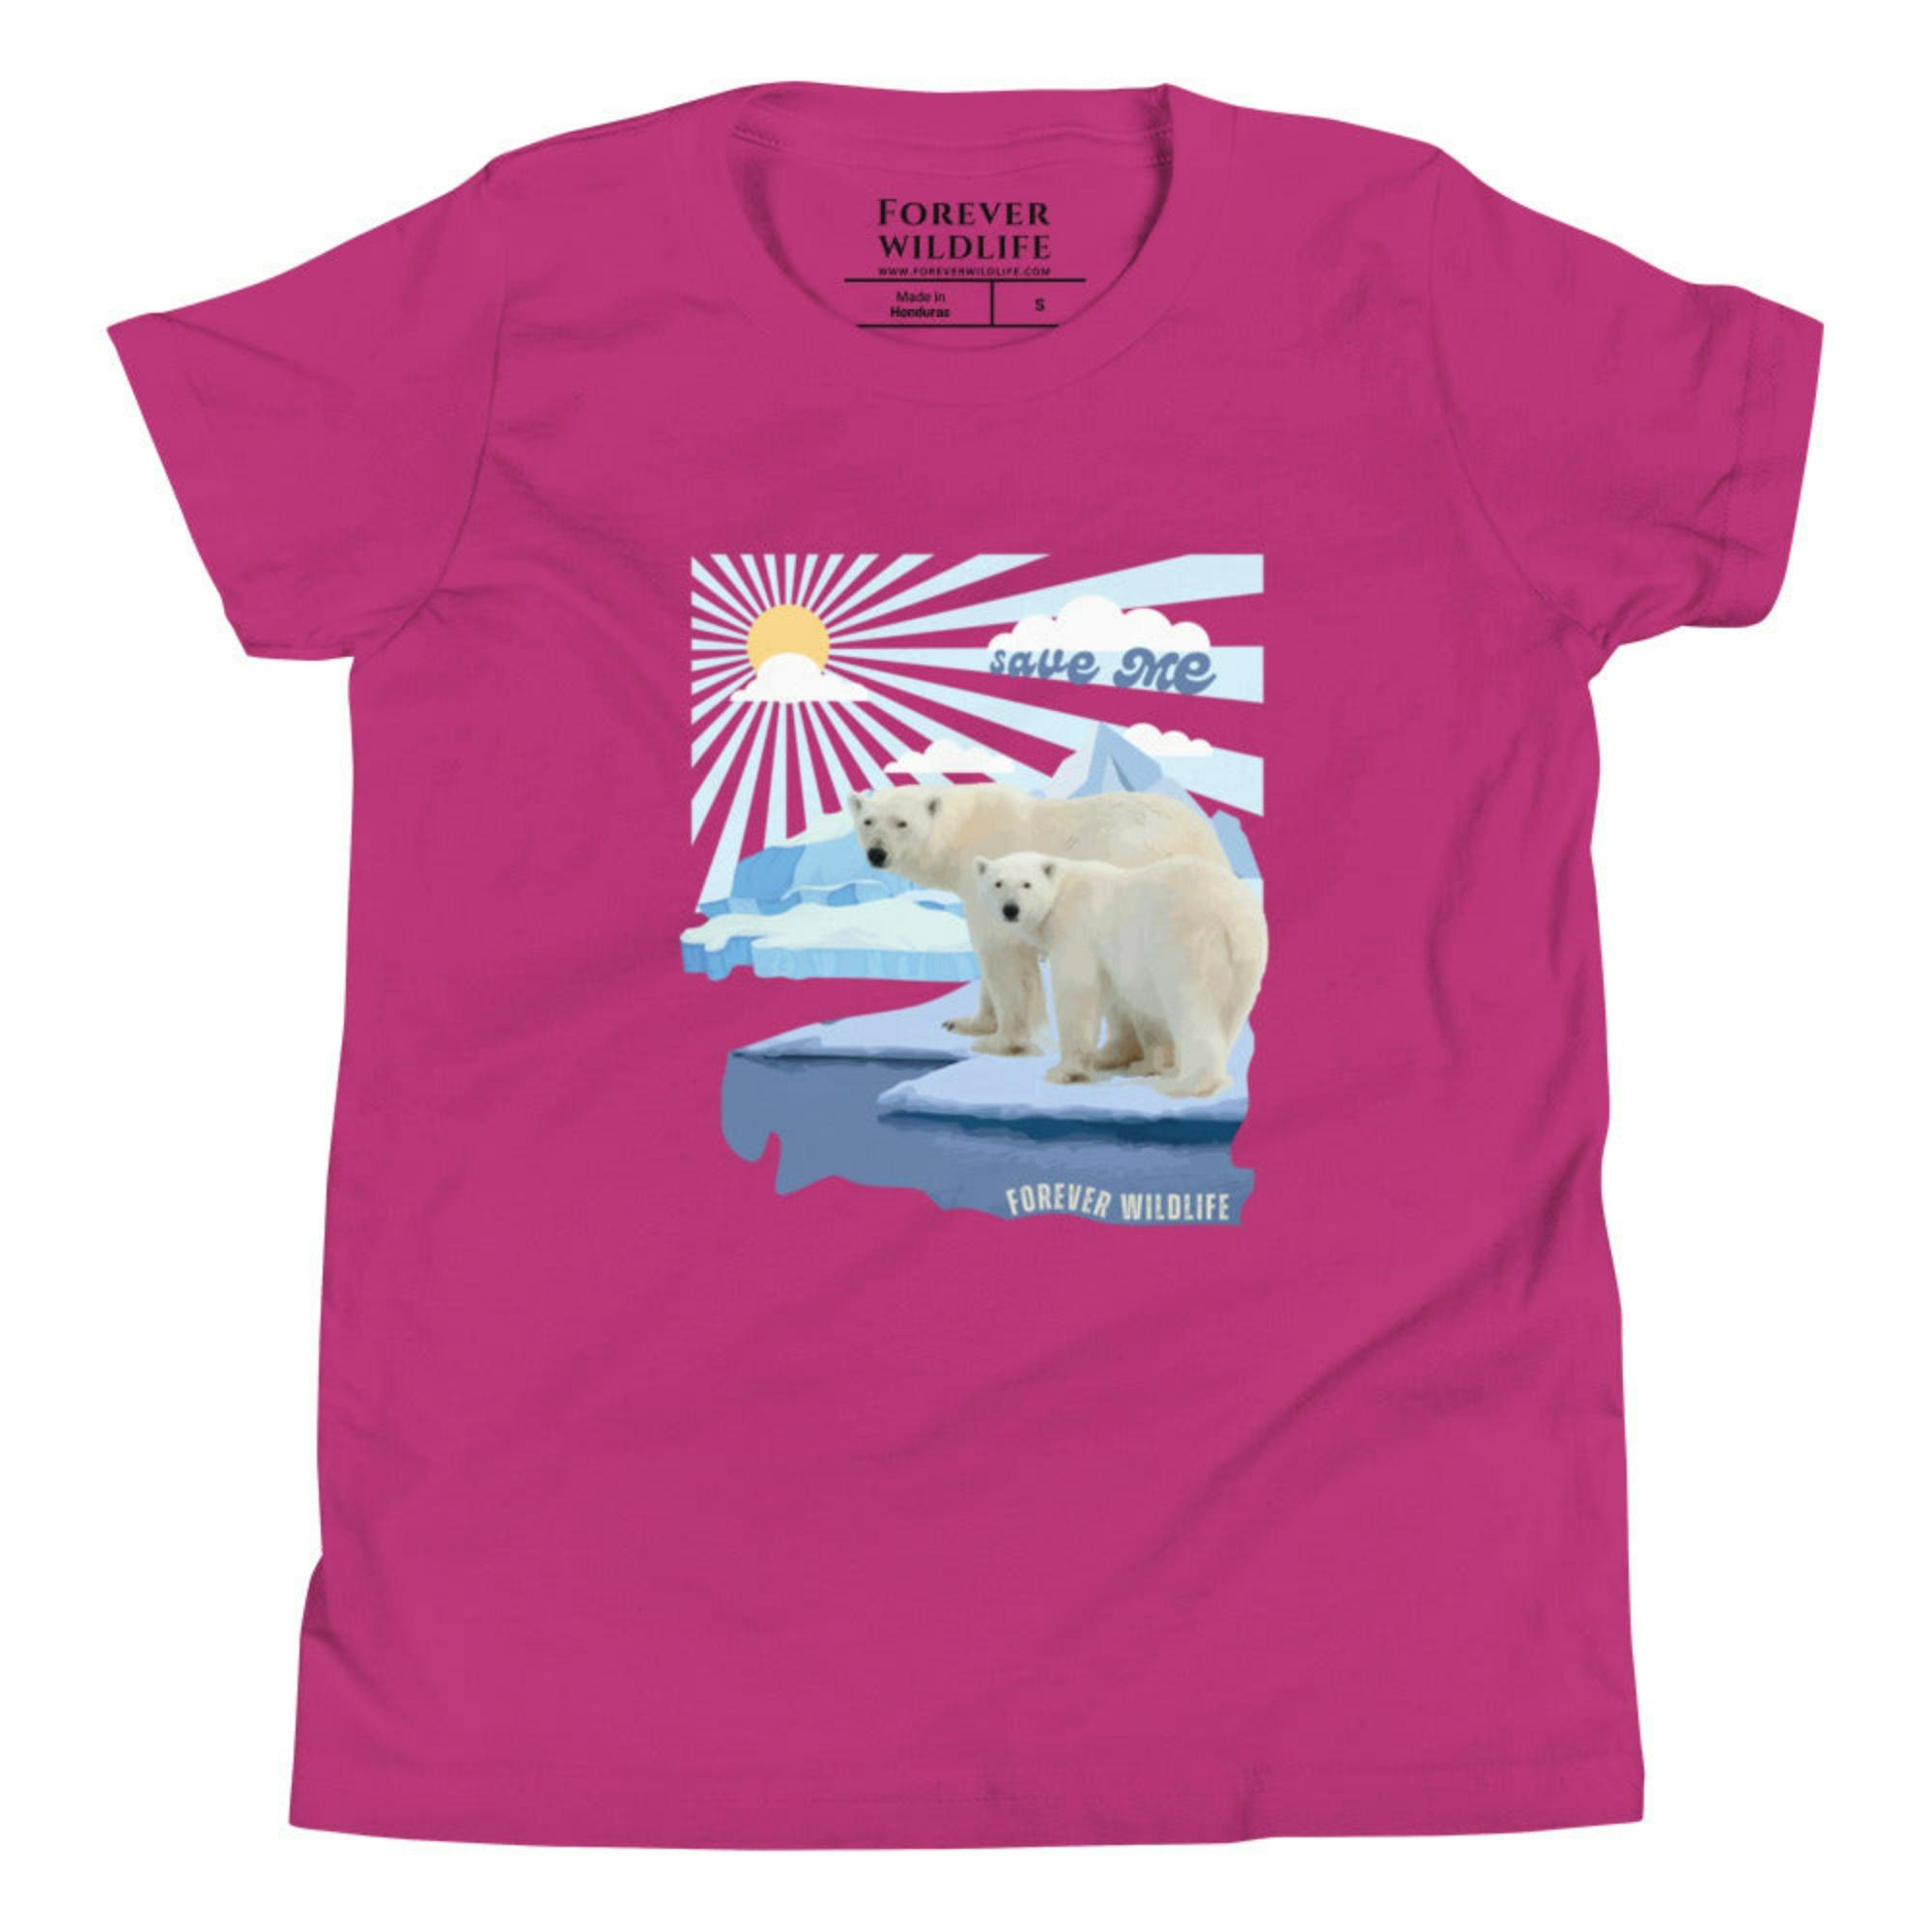 Save The Polar Bears Youth T-Shirt with Polar Bears graphic as part of Wildlife T Shirts, Wildlife Clothing & Apparel by Forever Wildlife